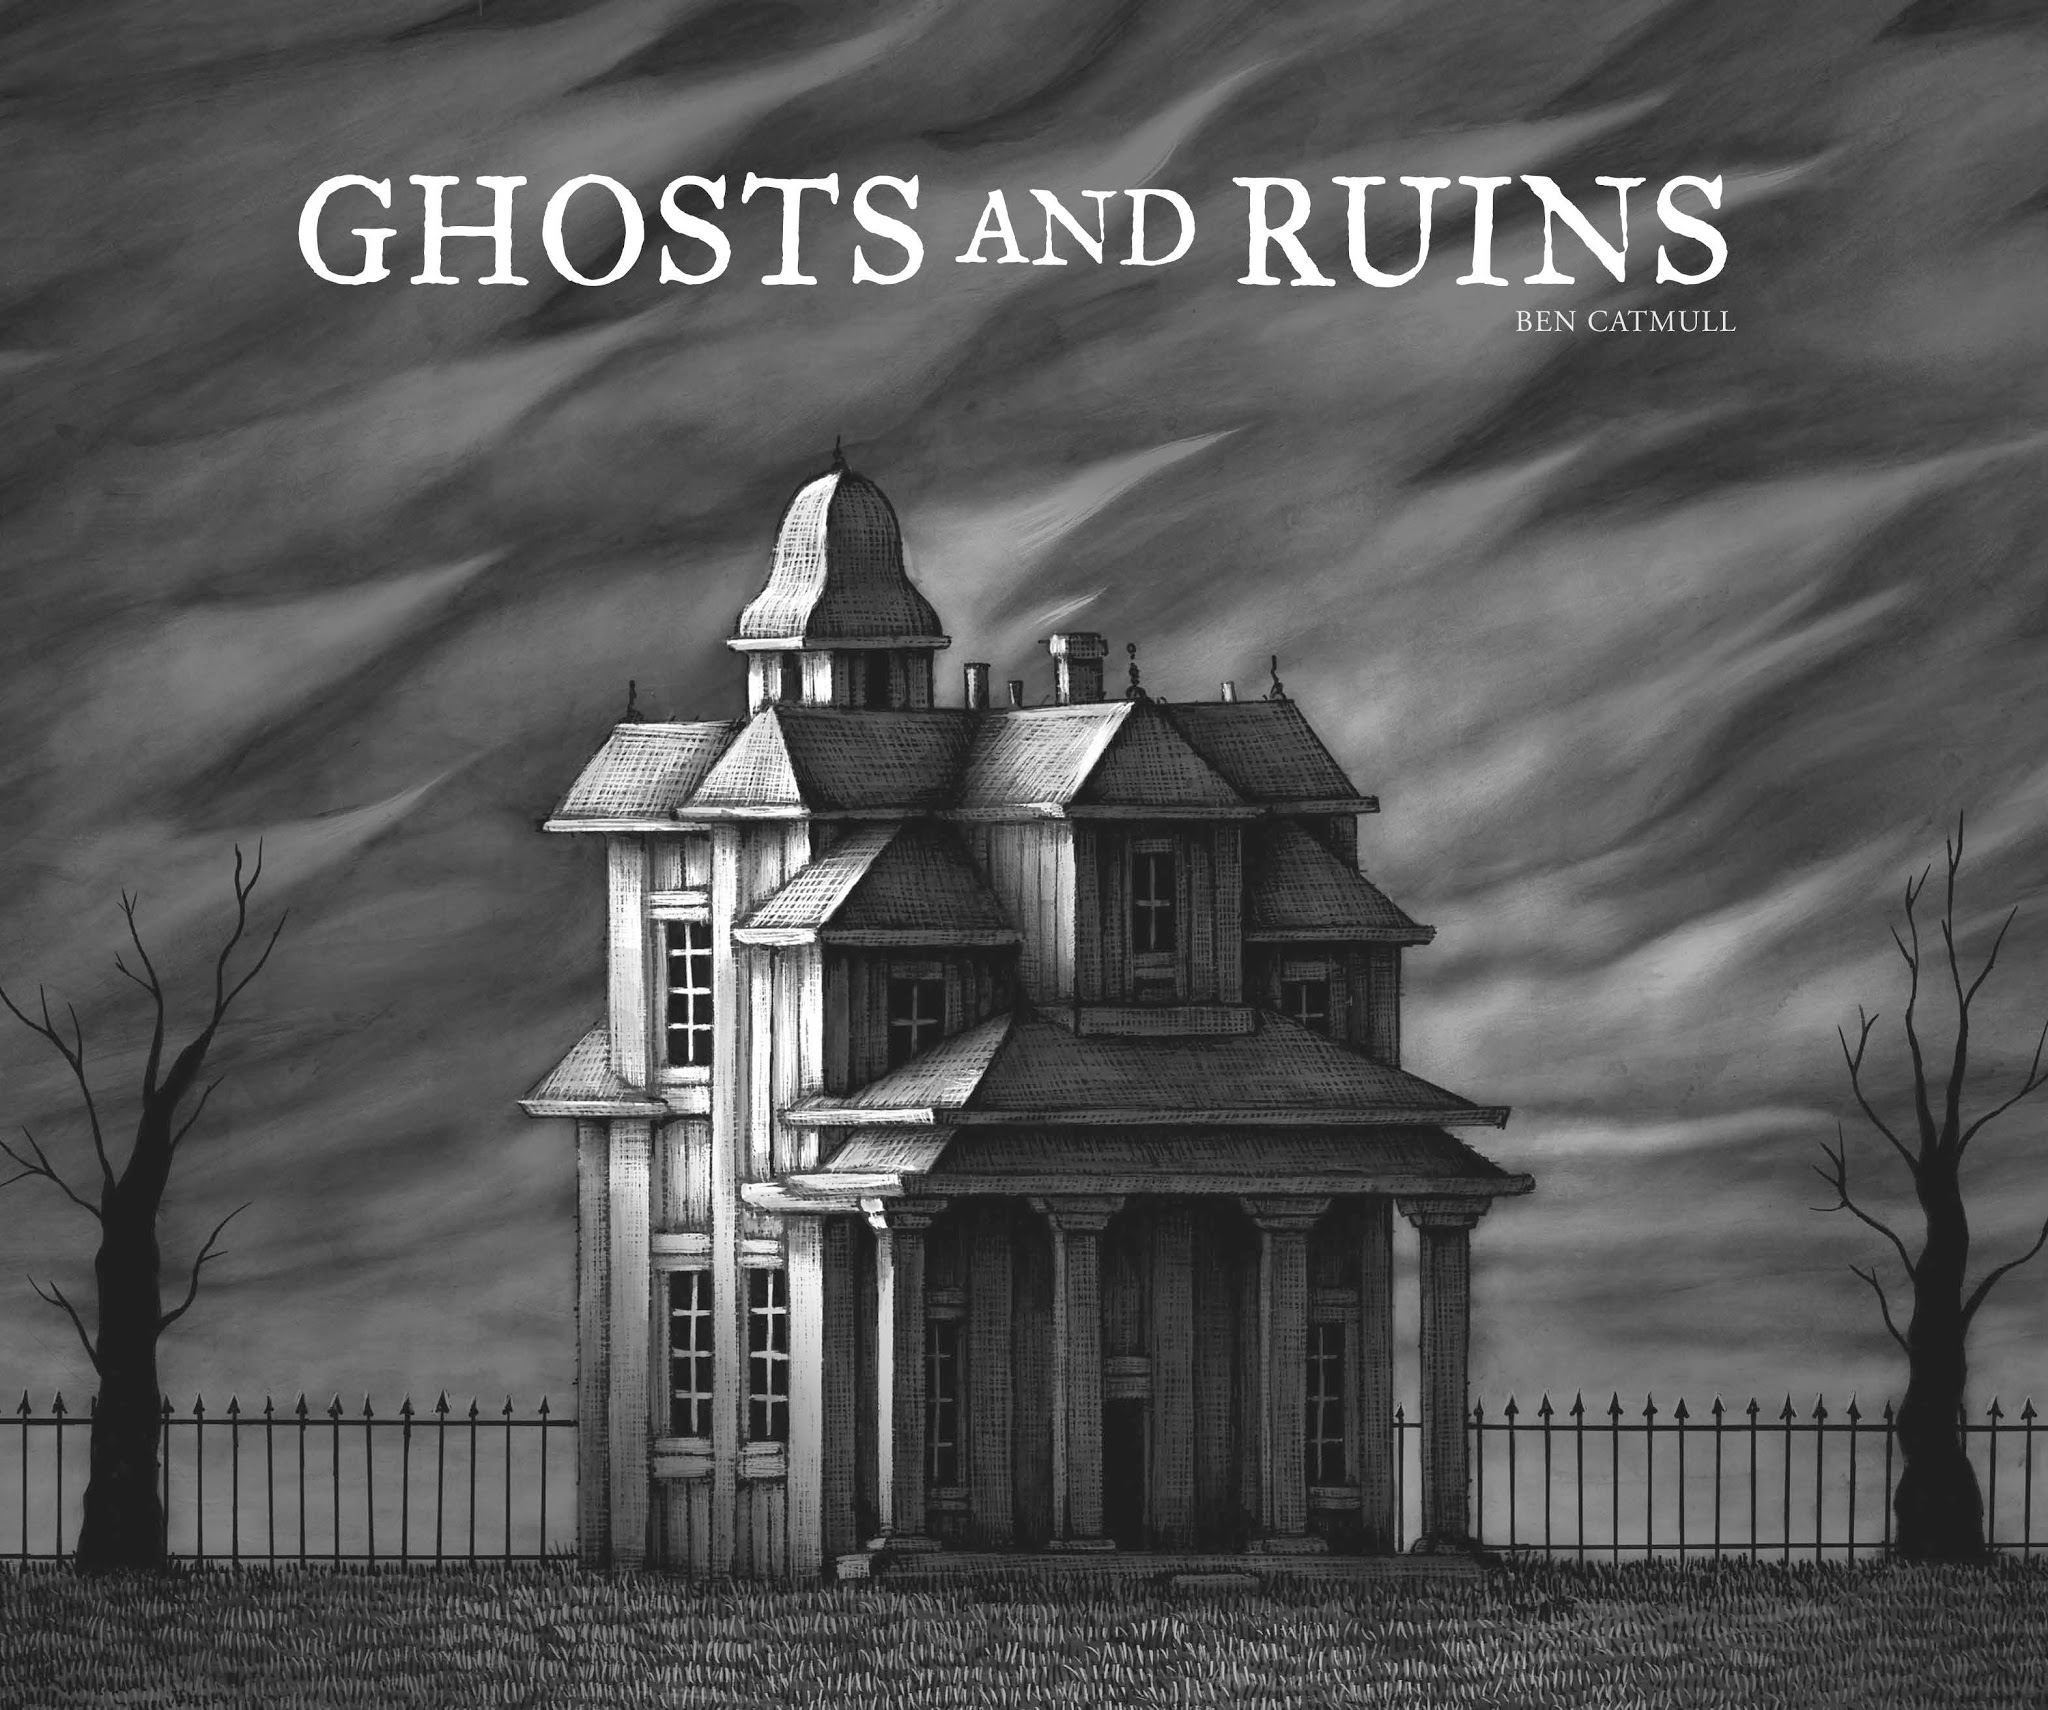 Read online Ghosts and Ruins comic -  Issue # TPB - 1